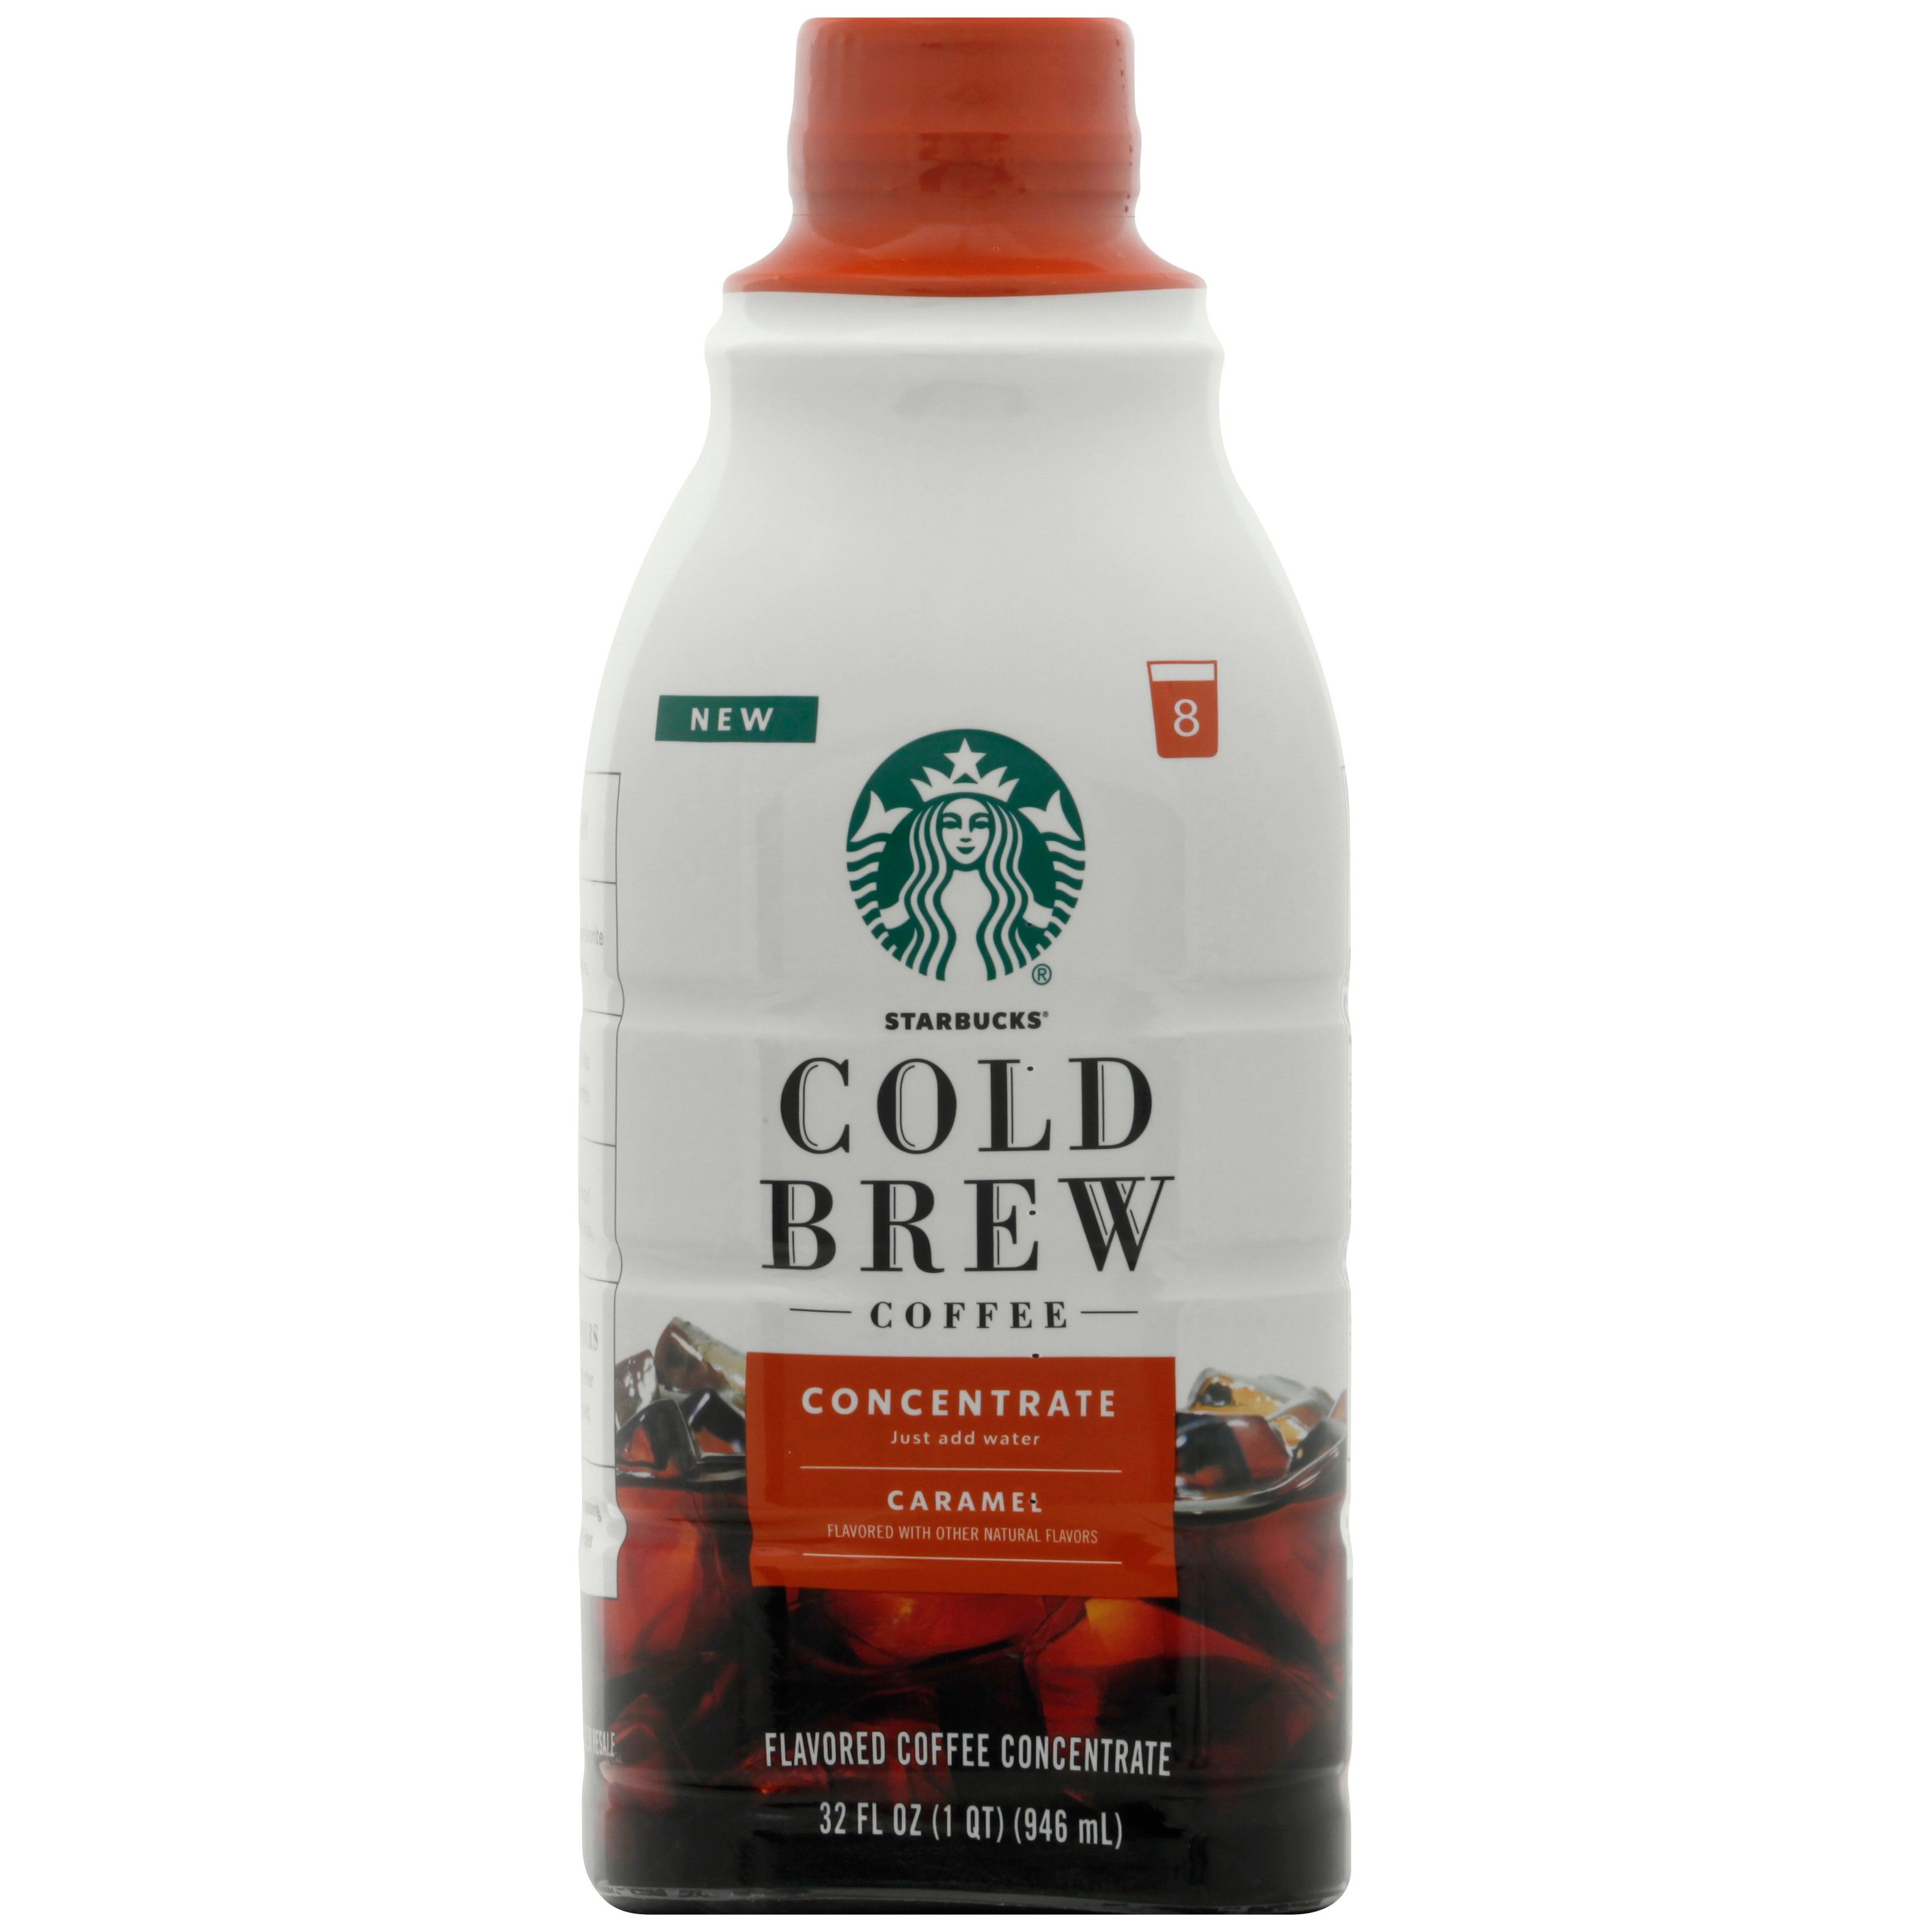 is starbucks cold brew concentrate gluten free